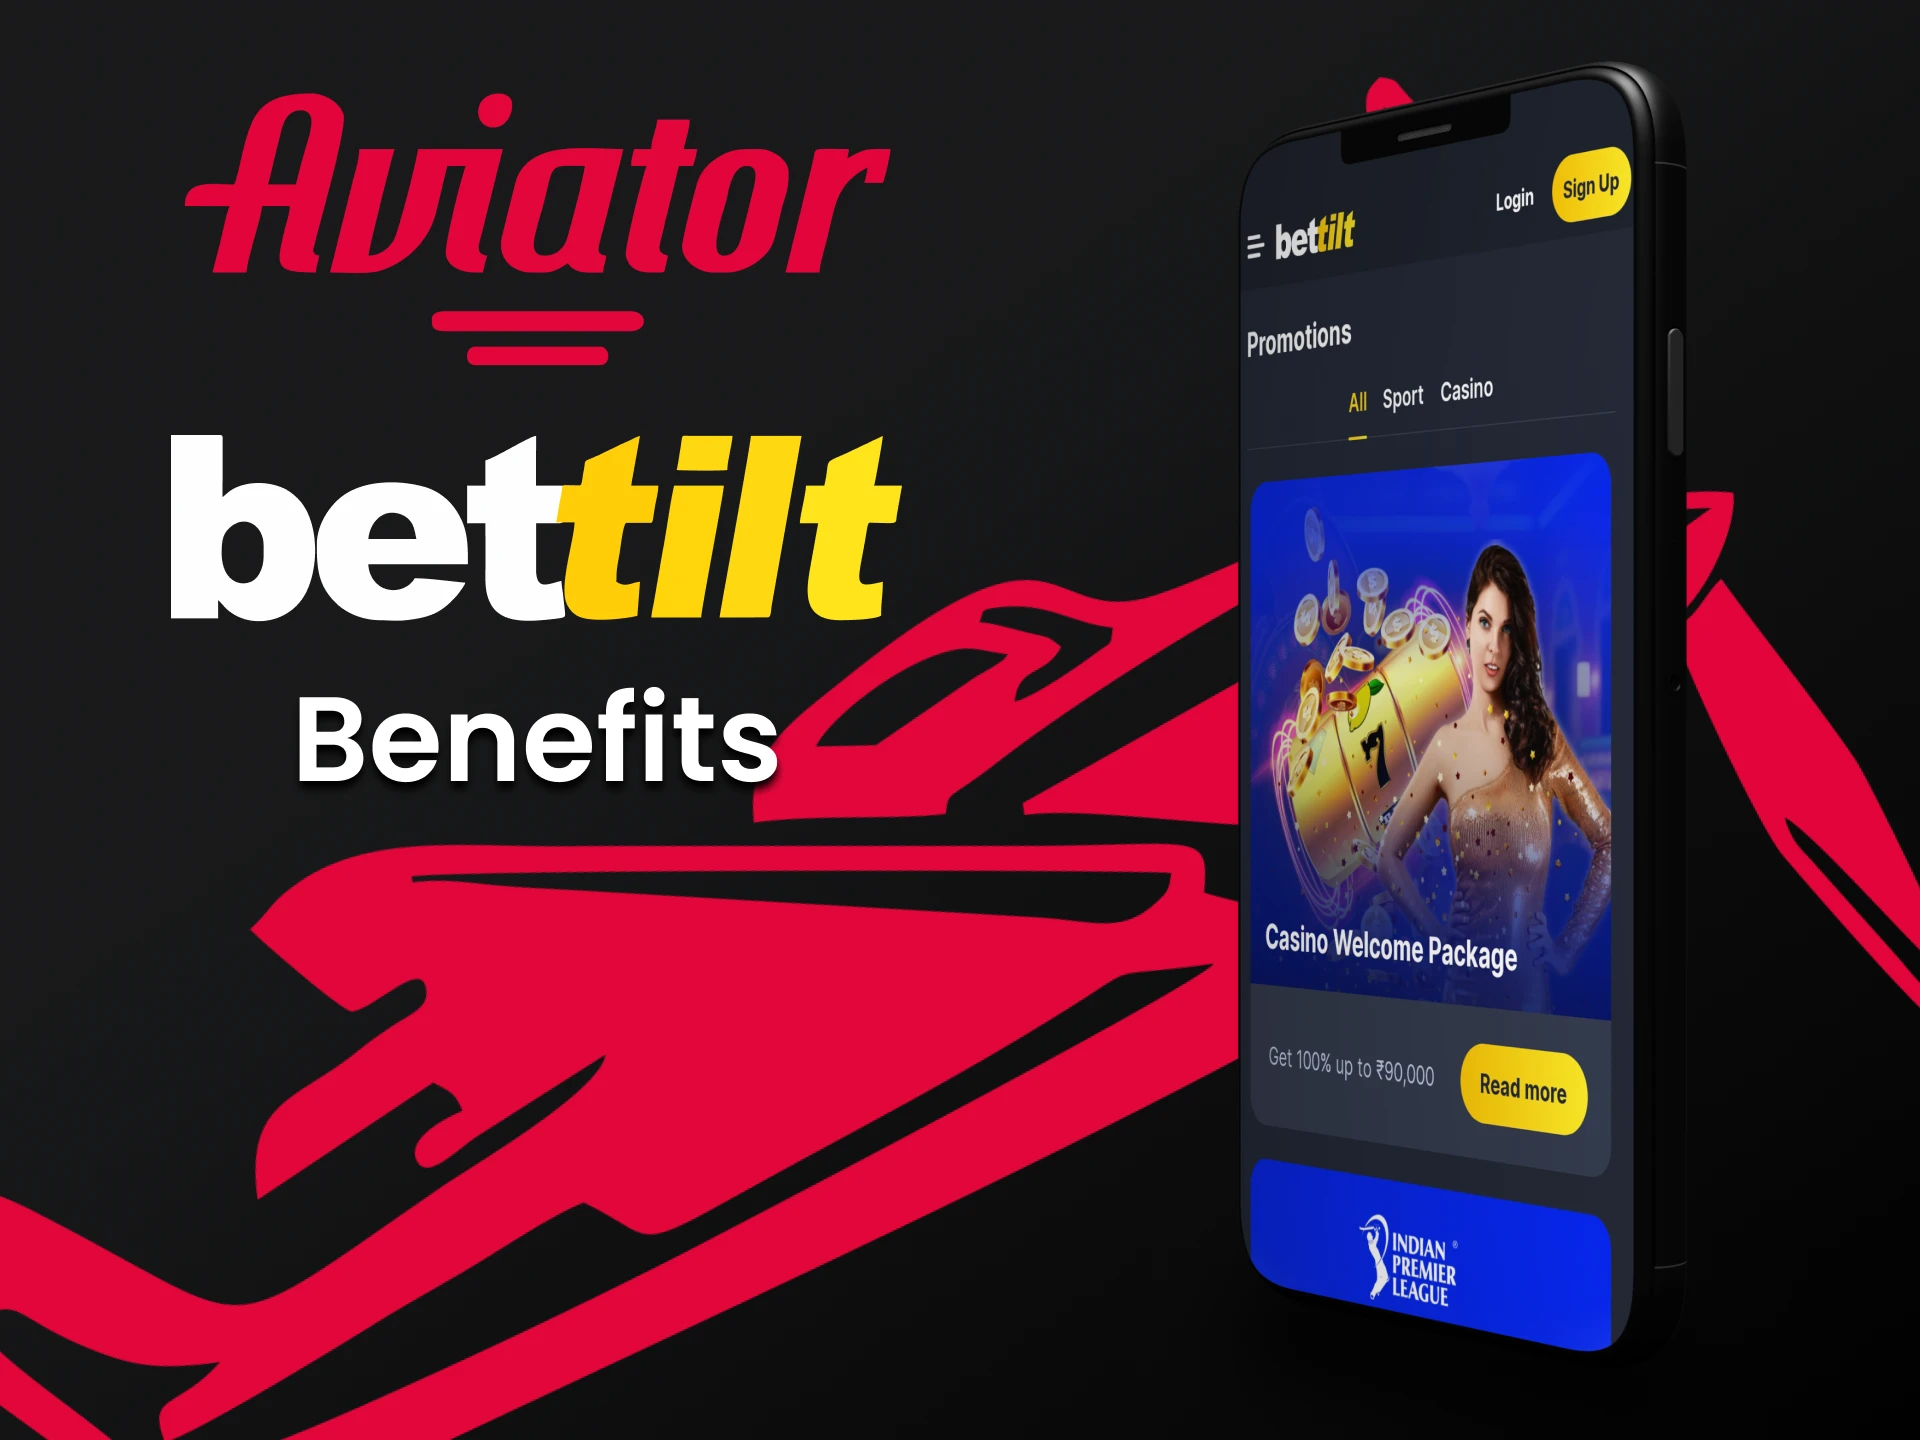 Find out the ways of transactions through the Bettilt app for the Aviator game.